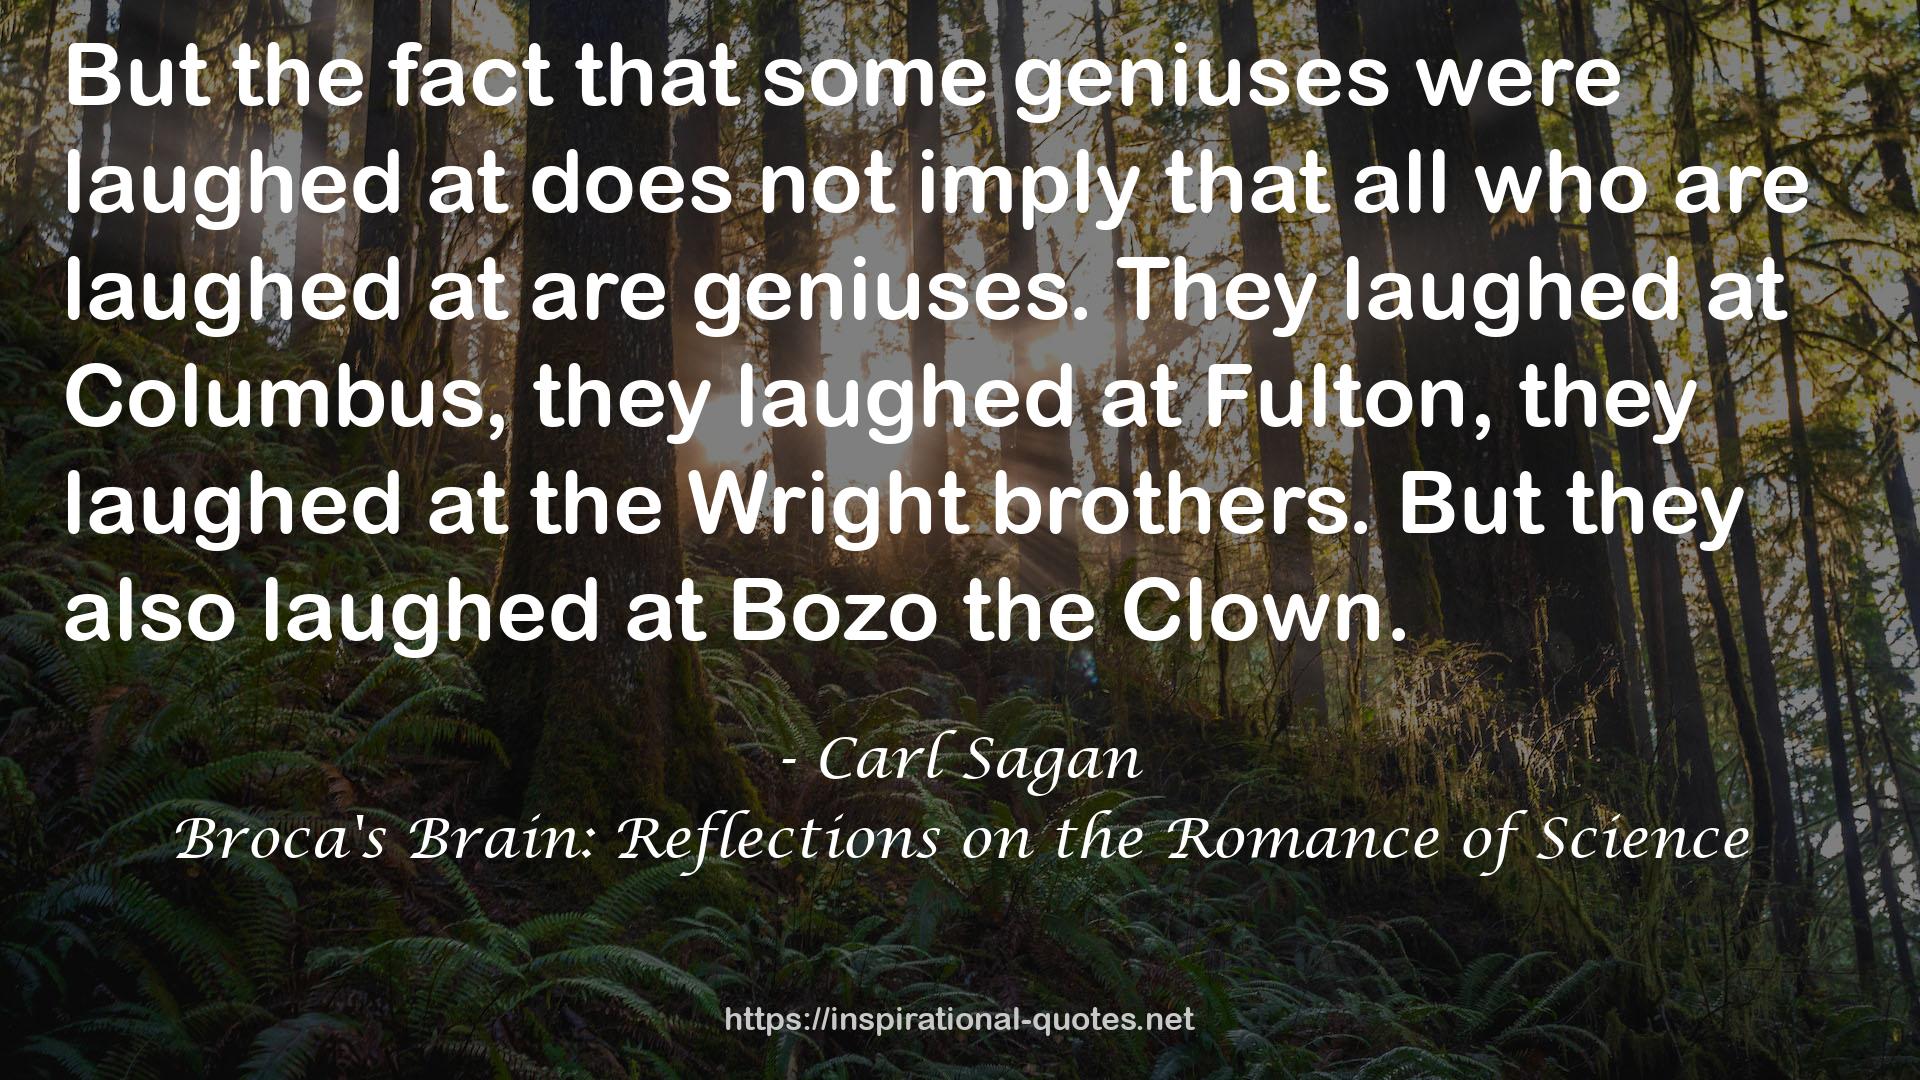 Broca's Brain: Reflections on the Romance of Science QUOTES